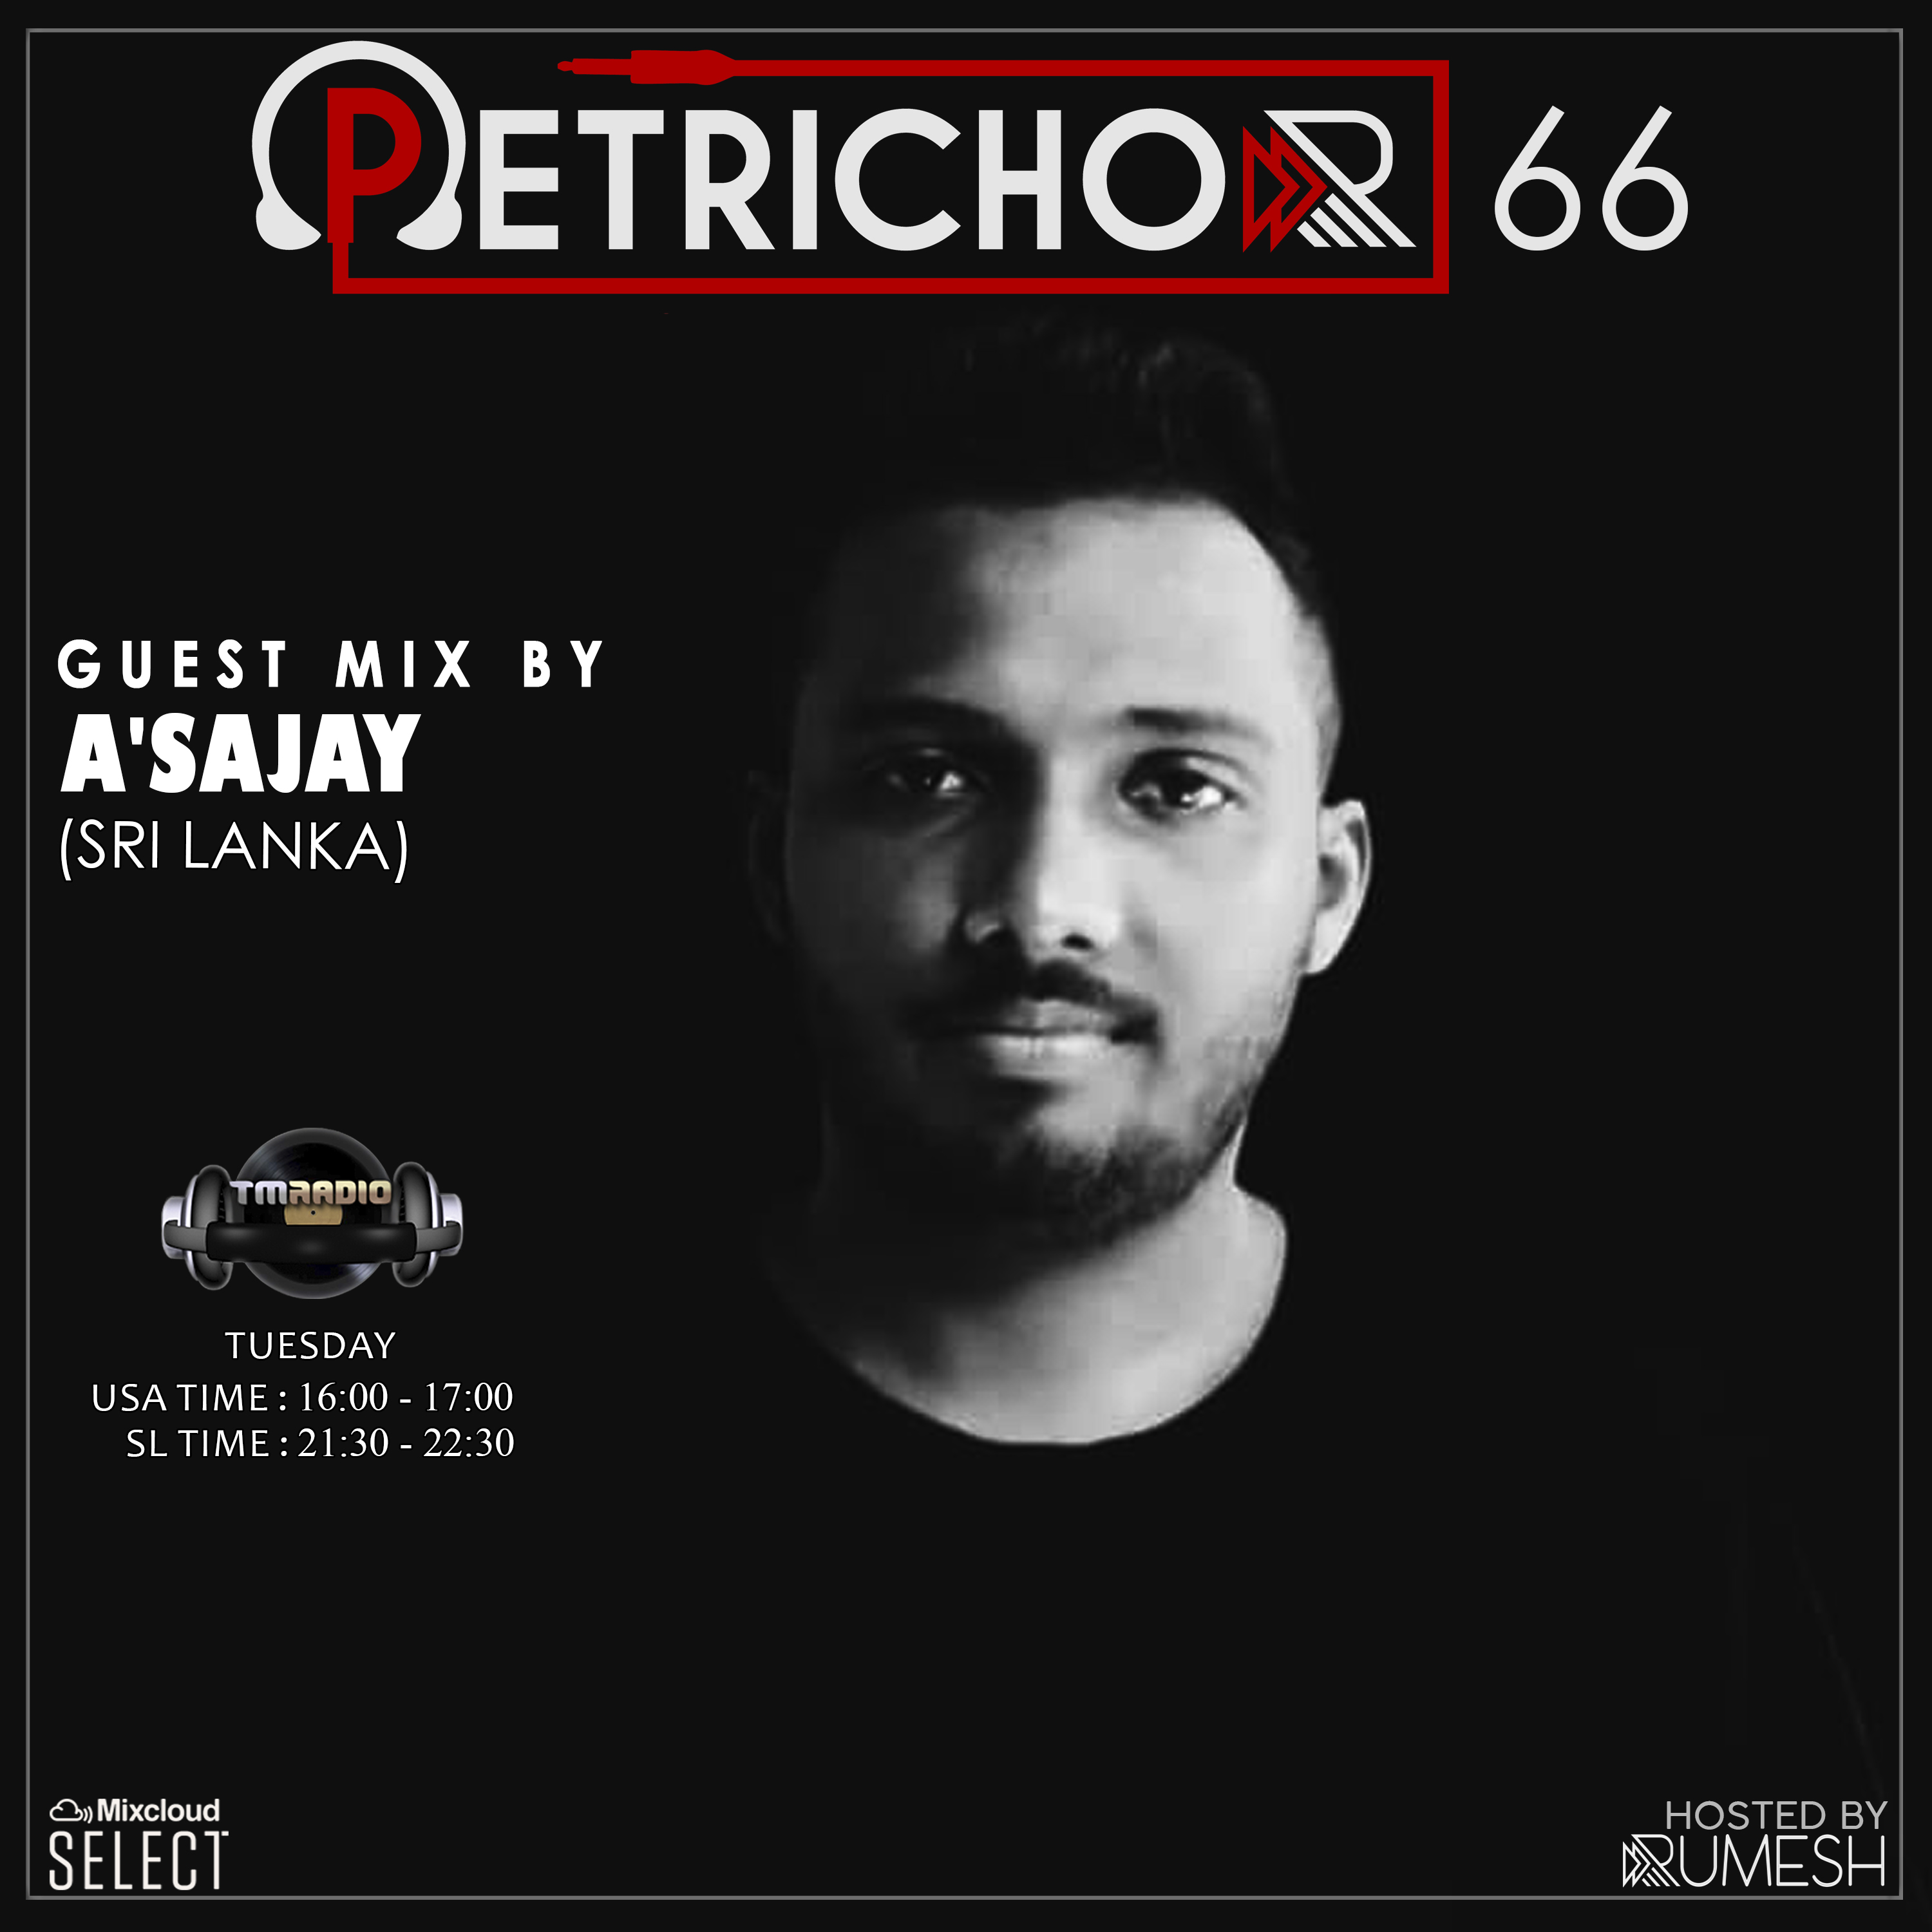 Petrichor 66 guest mix by A'SAJAY -(Sri Lanka) (from February 11th, 2020)